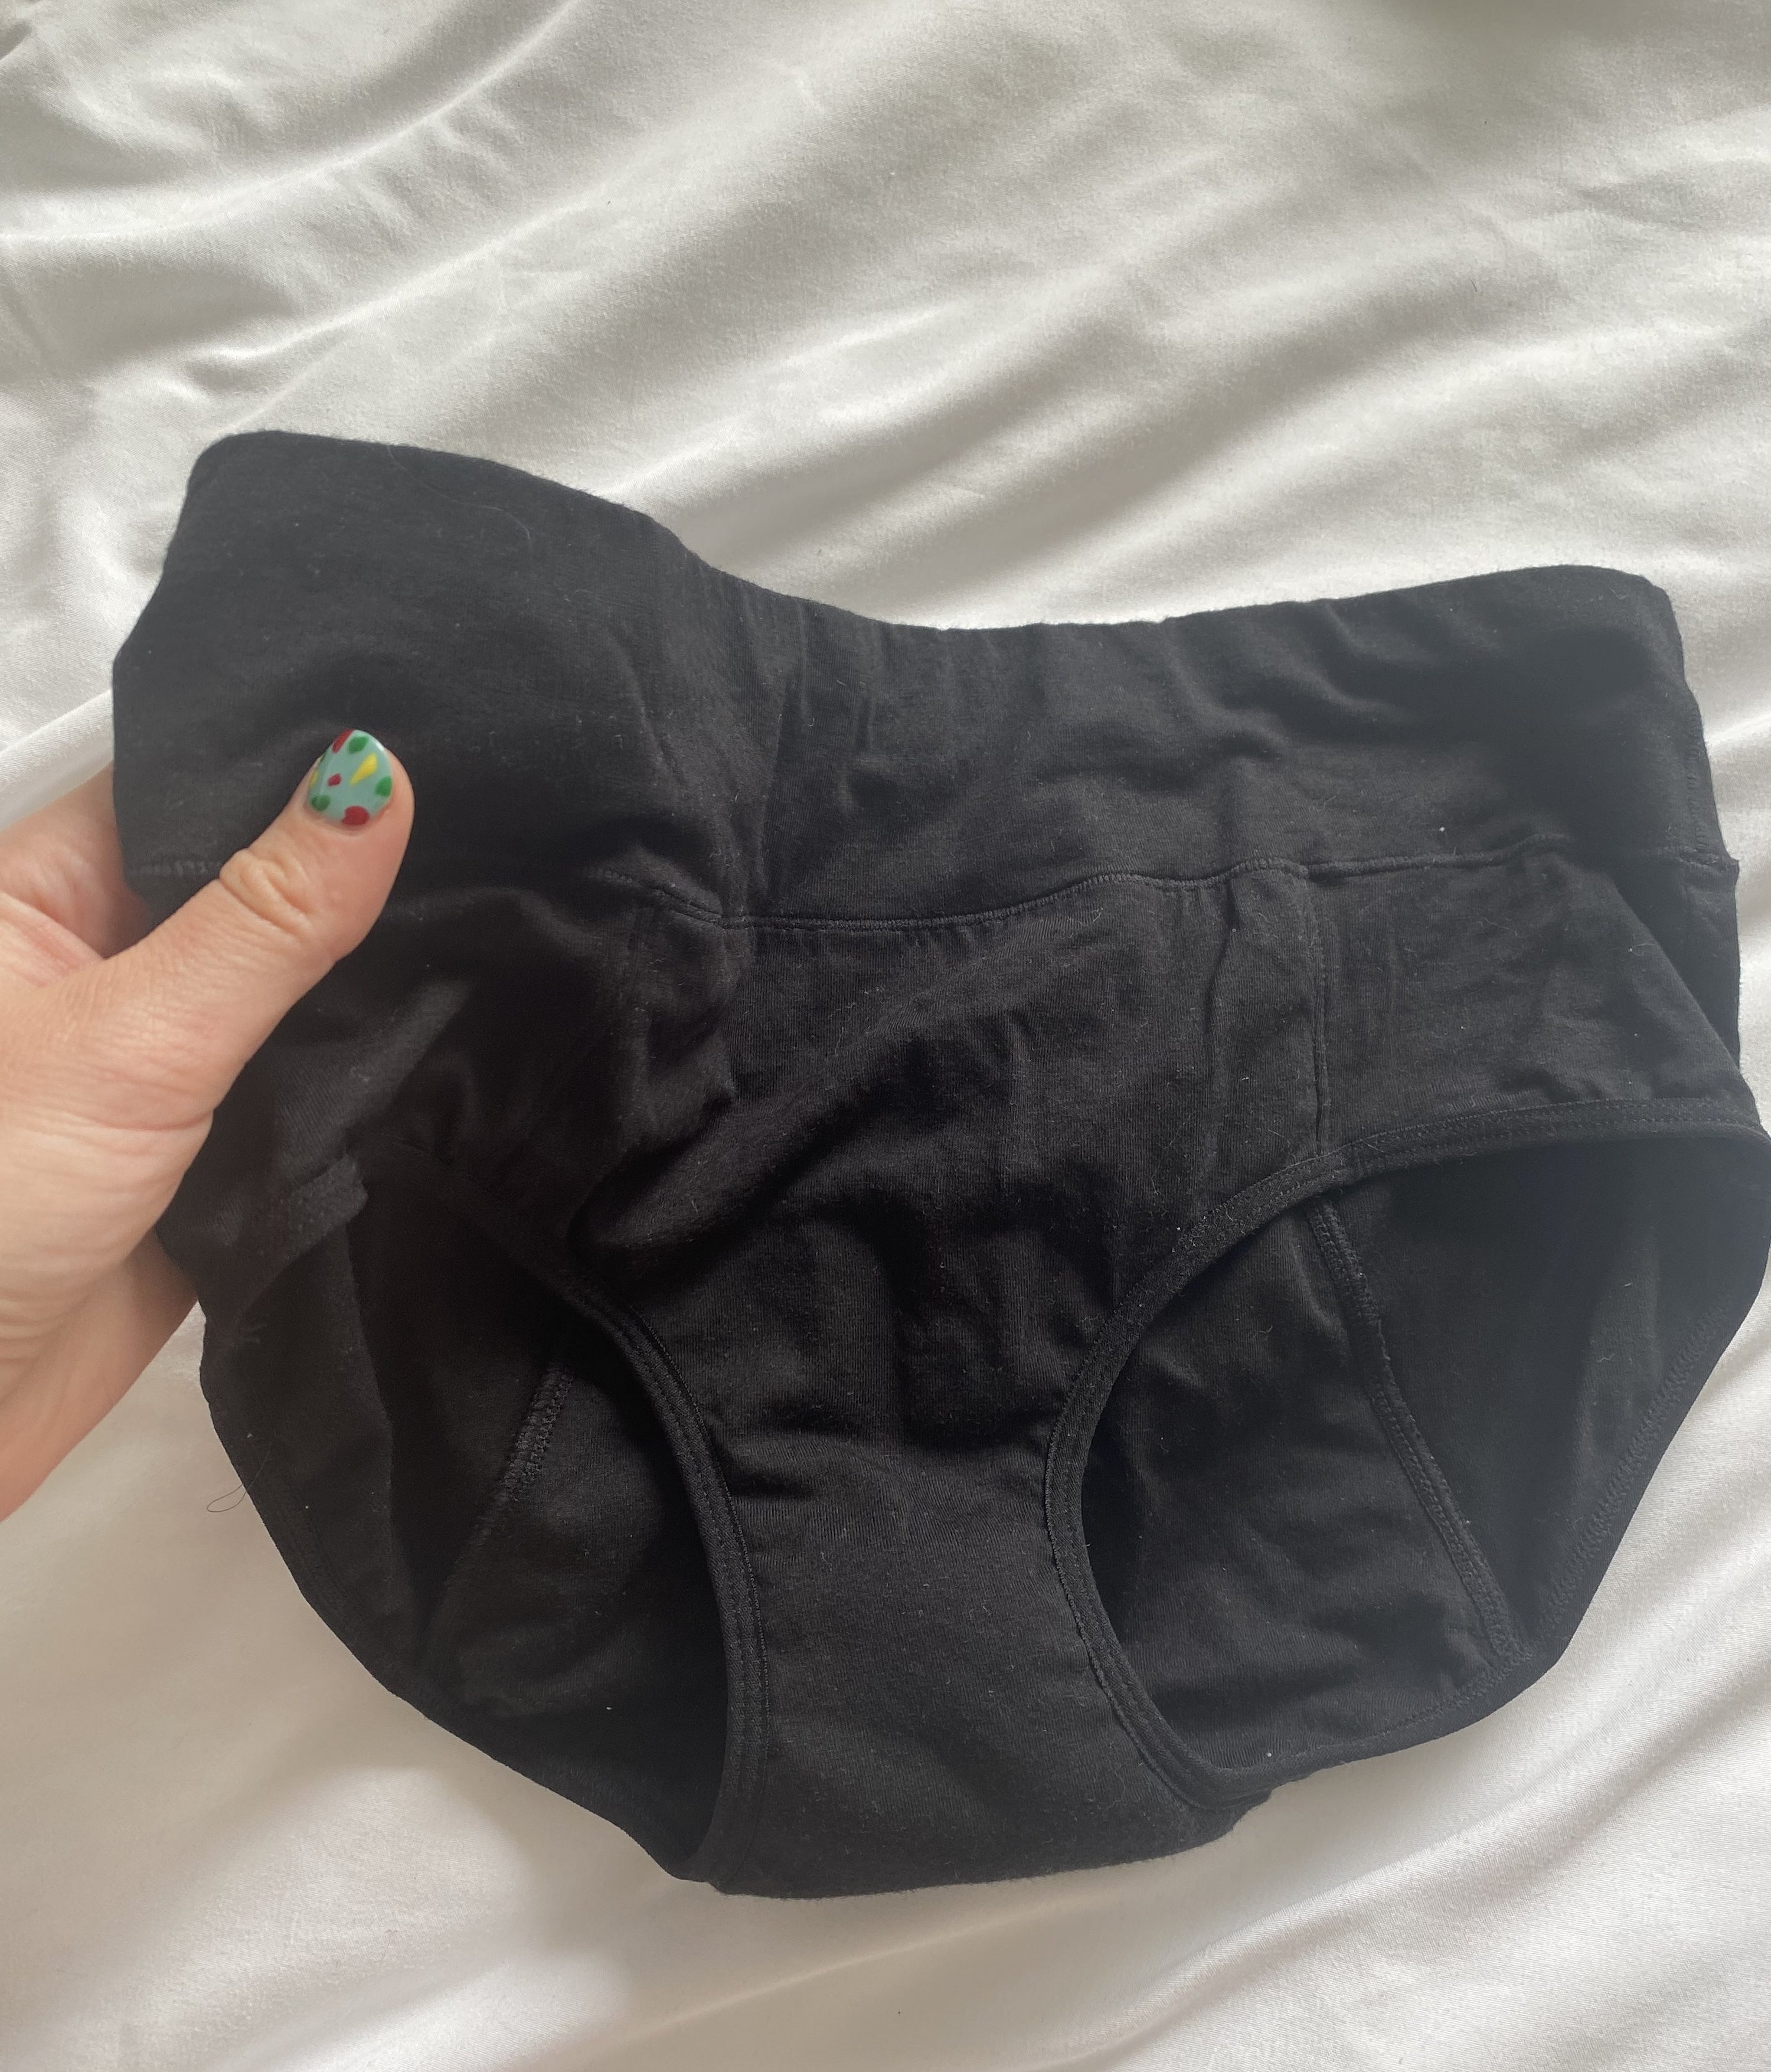 Genius Period Panties Allow You to Bleed On Politicians Who Don't Support  Women